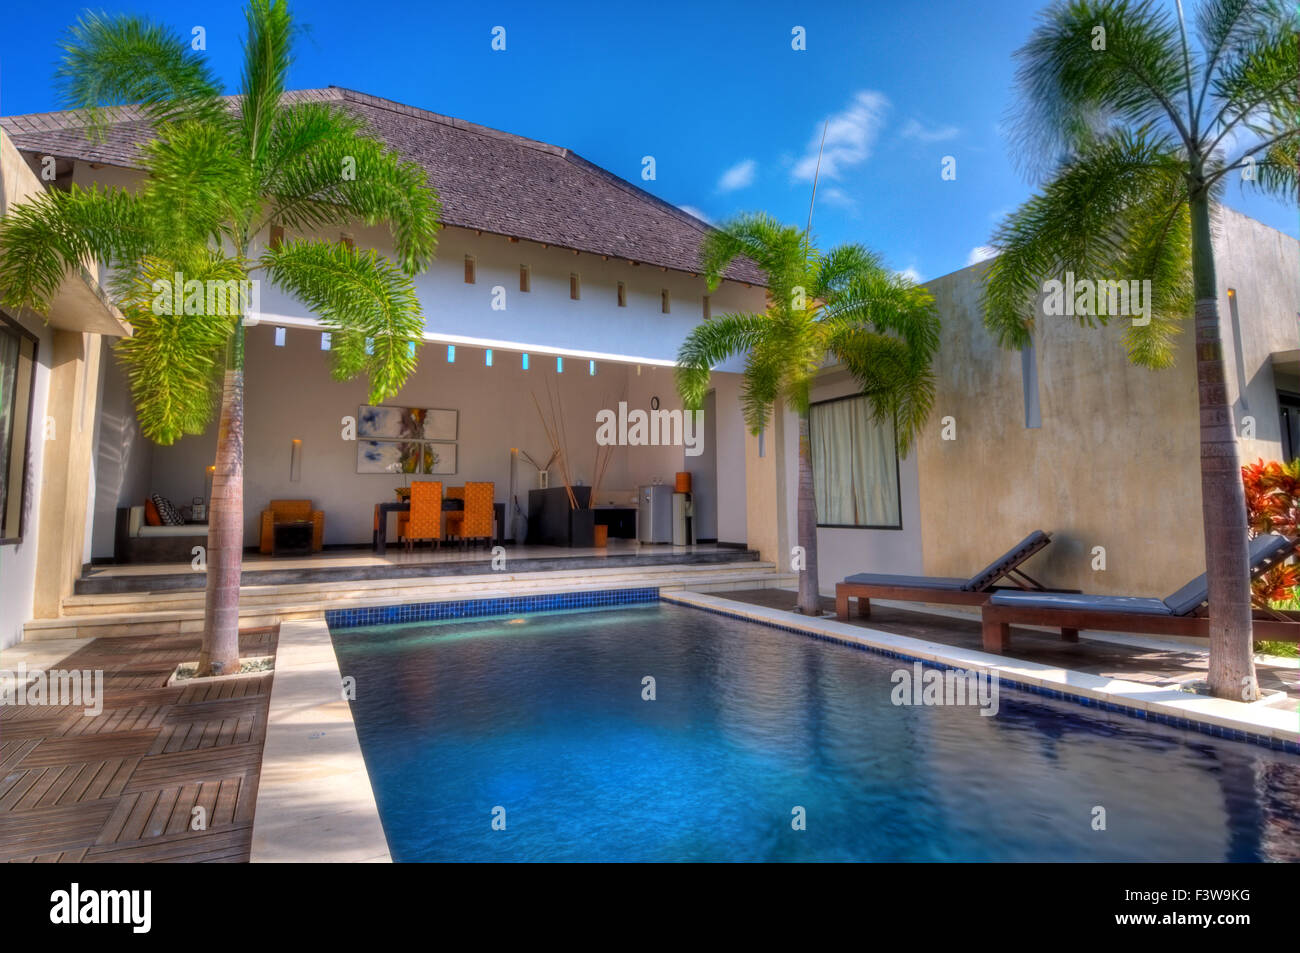 Villa with swimming pool and relaxation bed Stock Photo